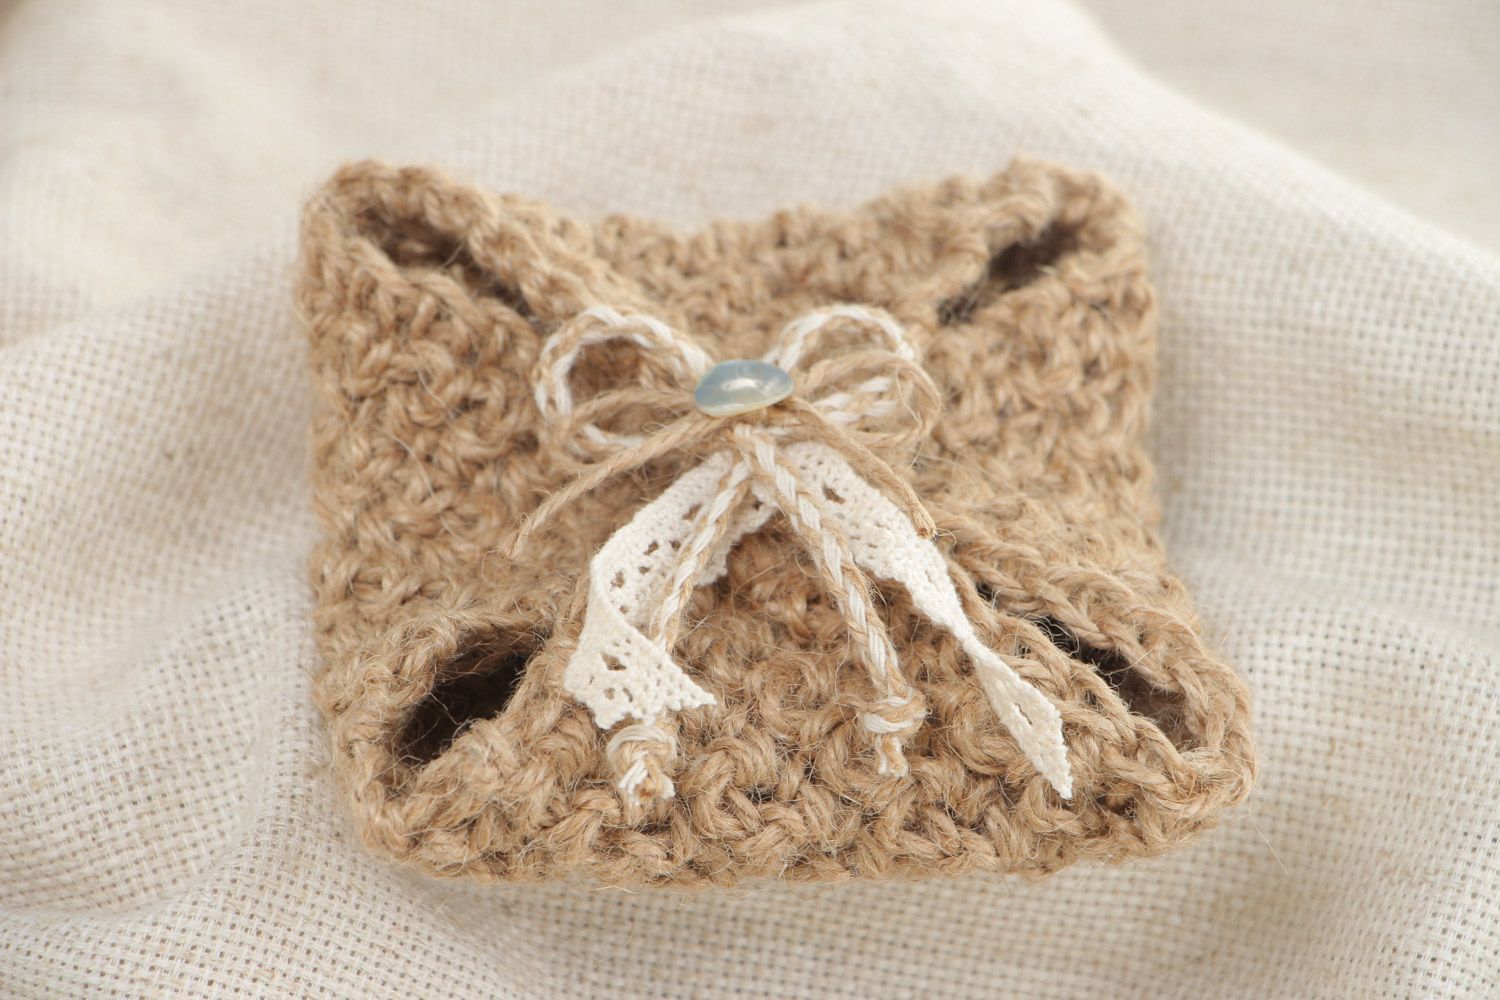 Handmade unusual wedding ring bearer pillow crocheted of jute with lace  photo 1